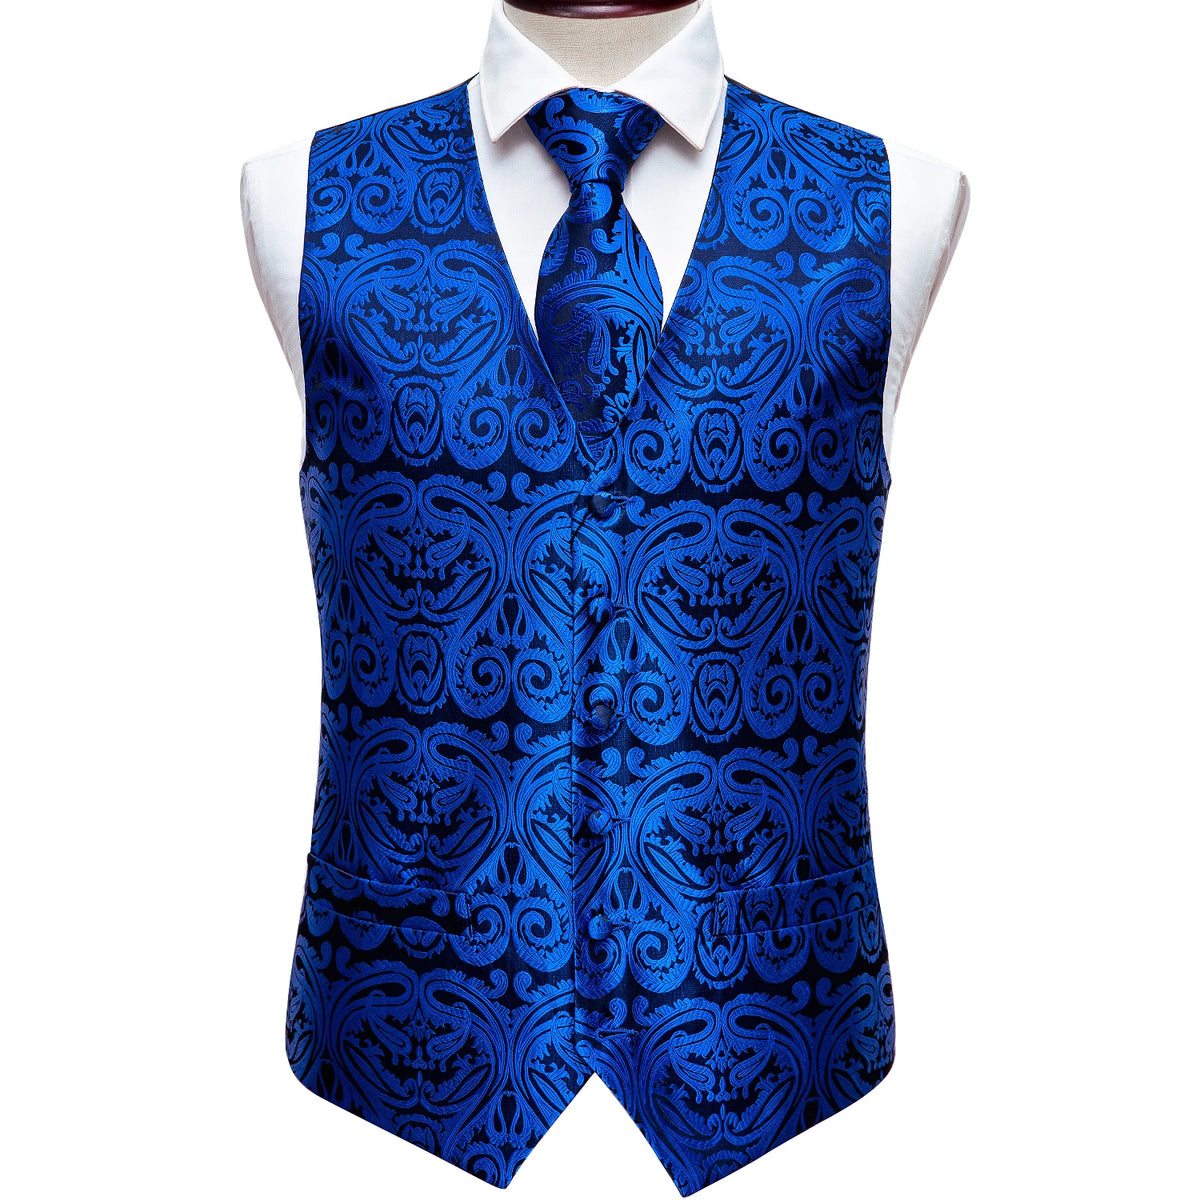 a blue vest and tie on a mannequin